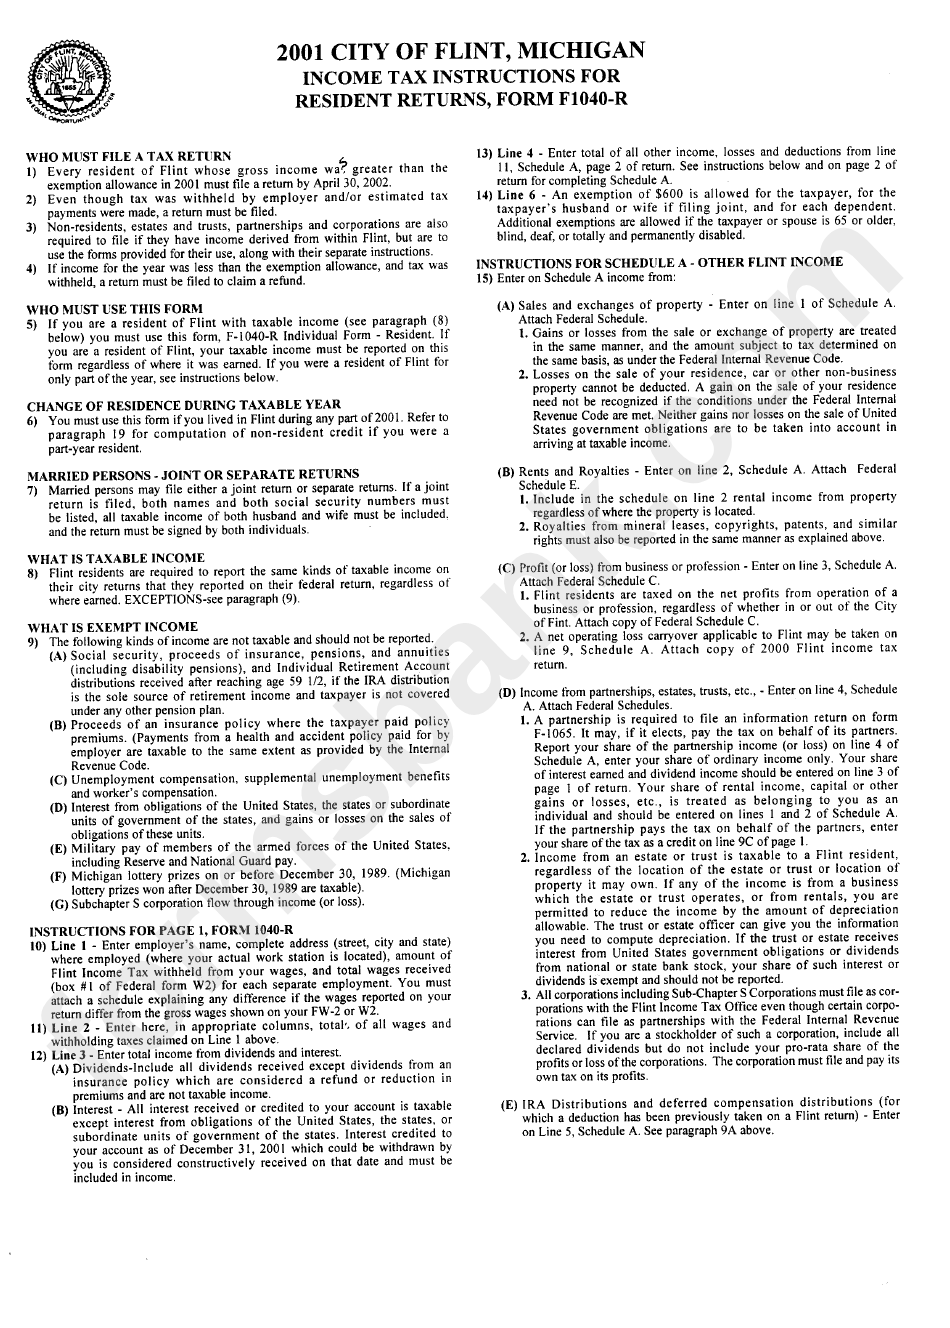 Form F1040-R - 2001 City Of Flint, Income Tax For Resident Returns - Instructions